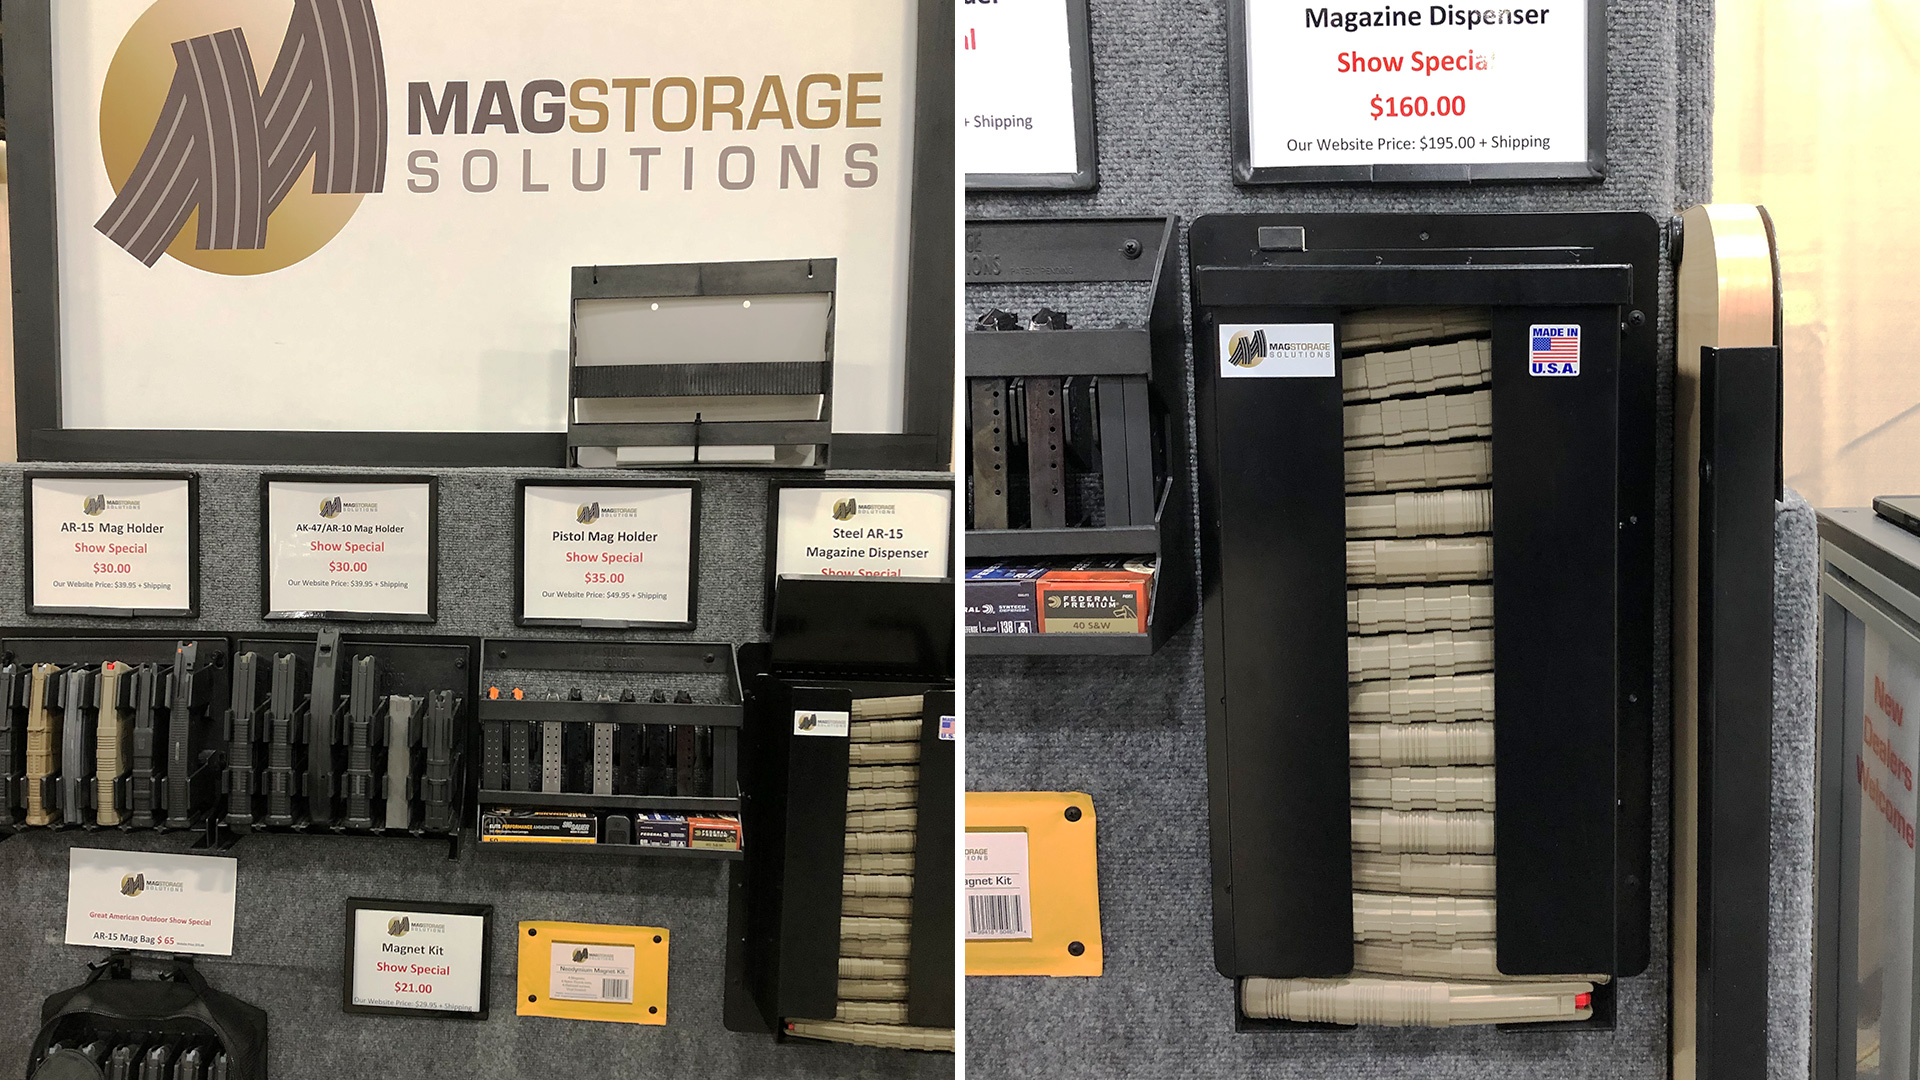 Mag Storage Solutions